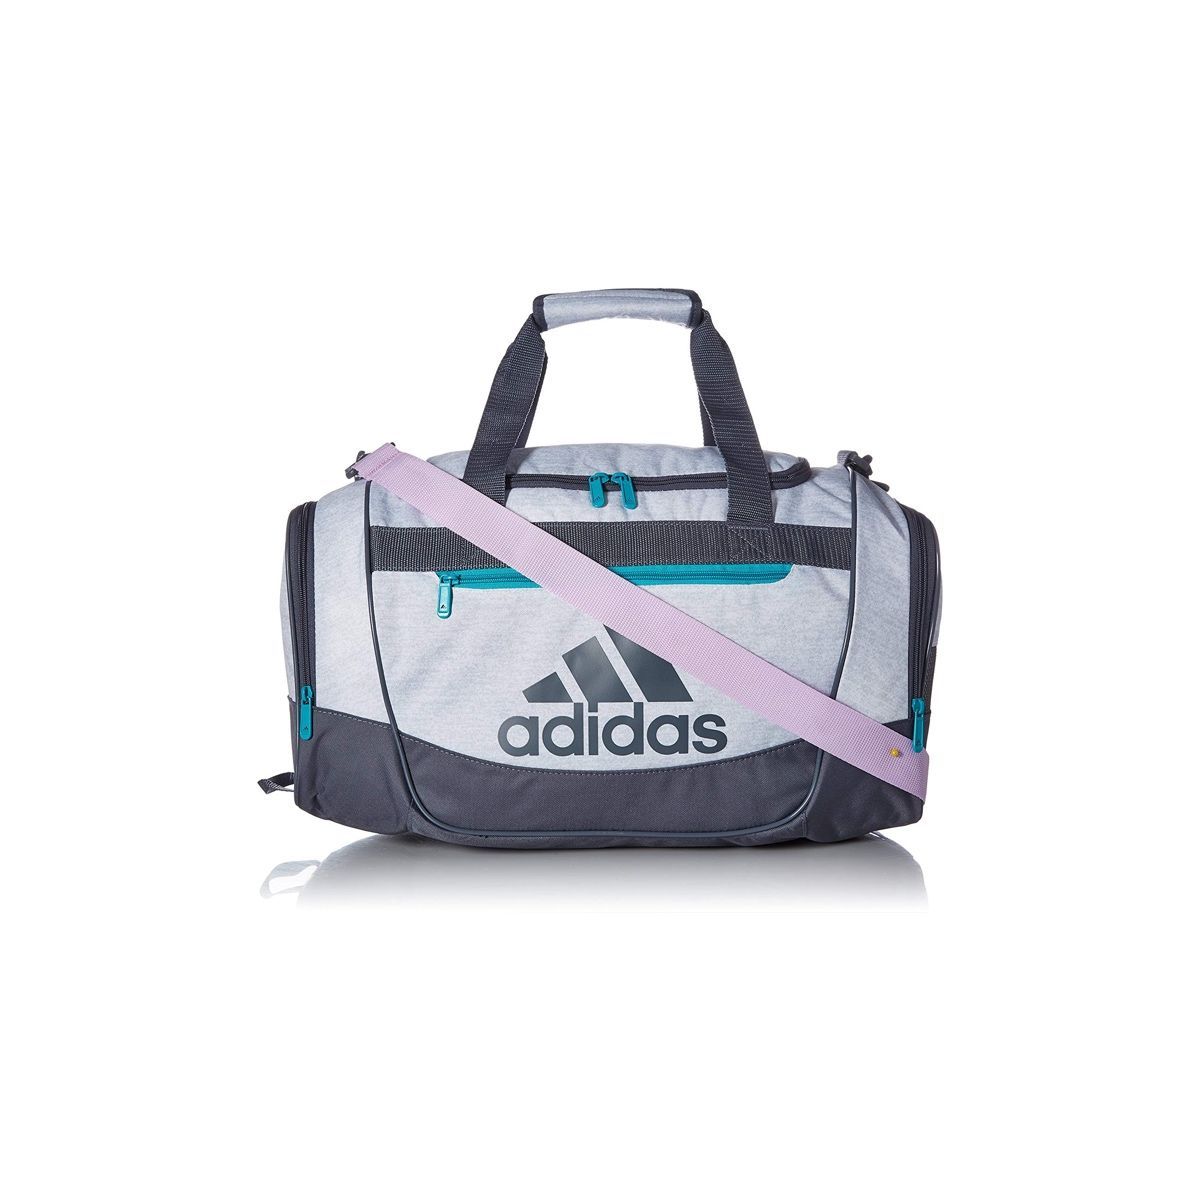 adidas bag with shoe compartment